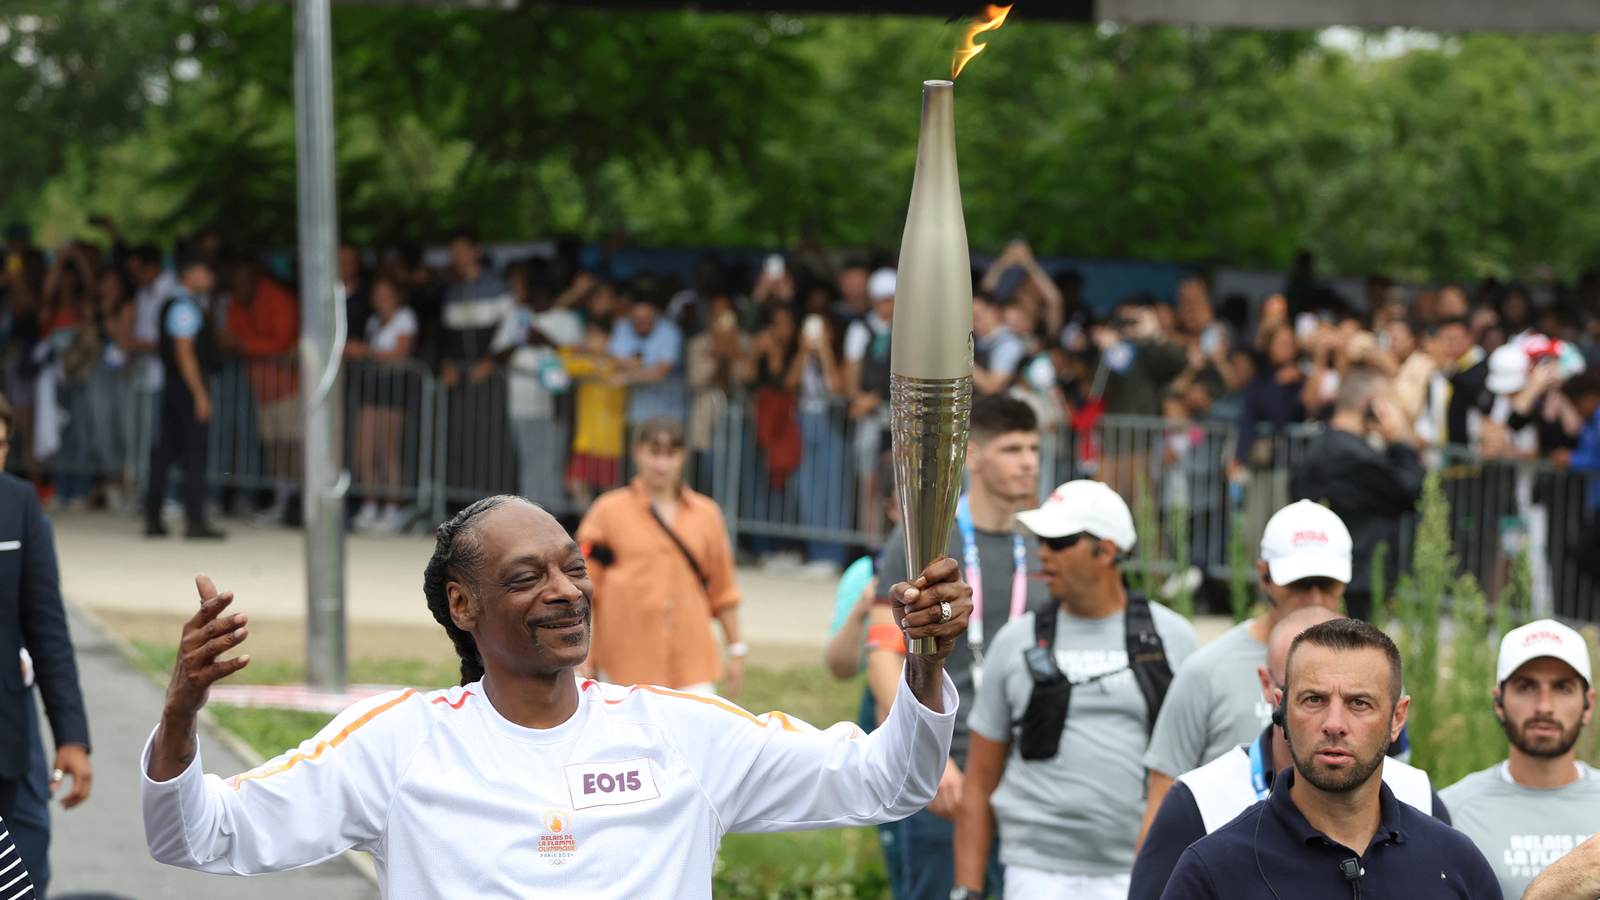 Why is Snoop Dogg at Olympics? Snoop Dogg carries the Olympic torch before opening ceremony in Paris [Video]